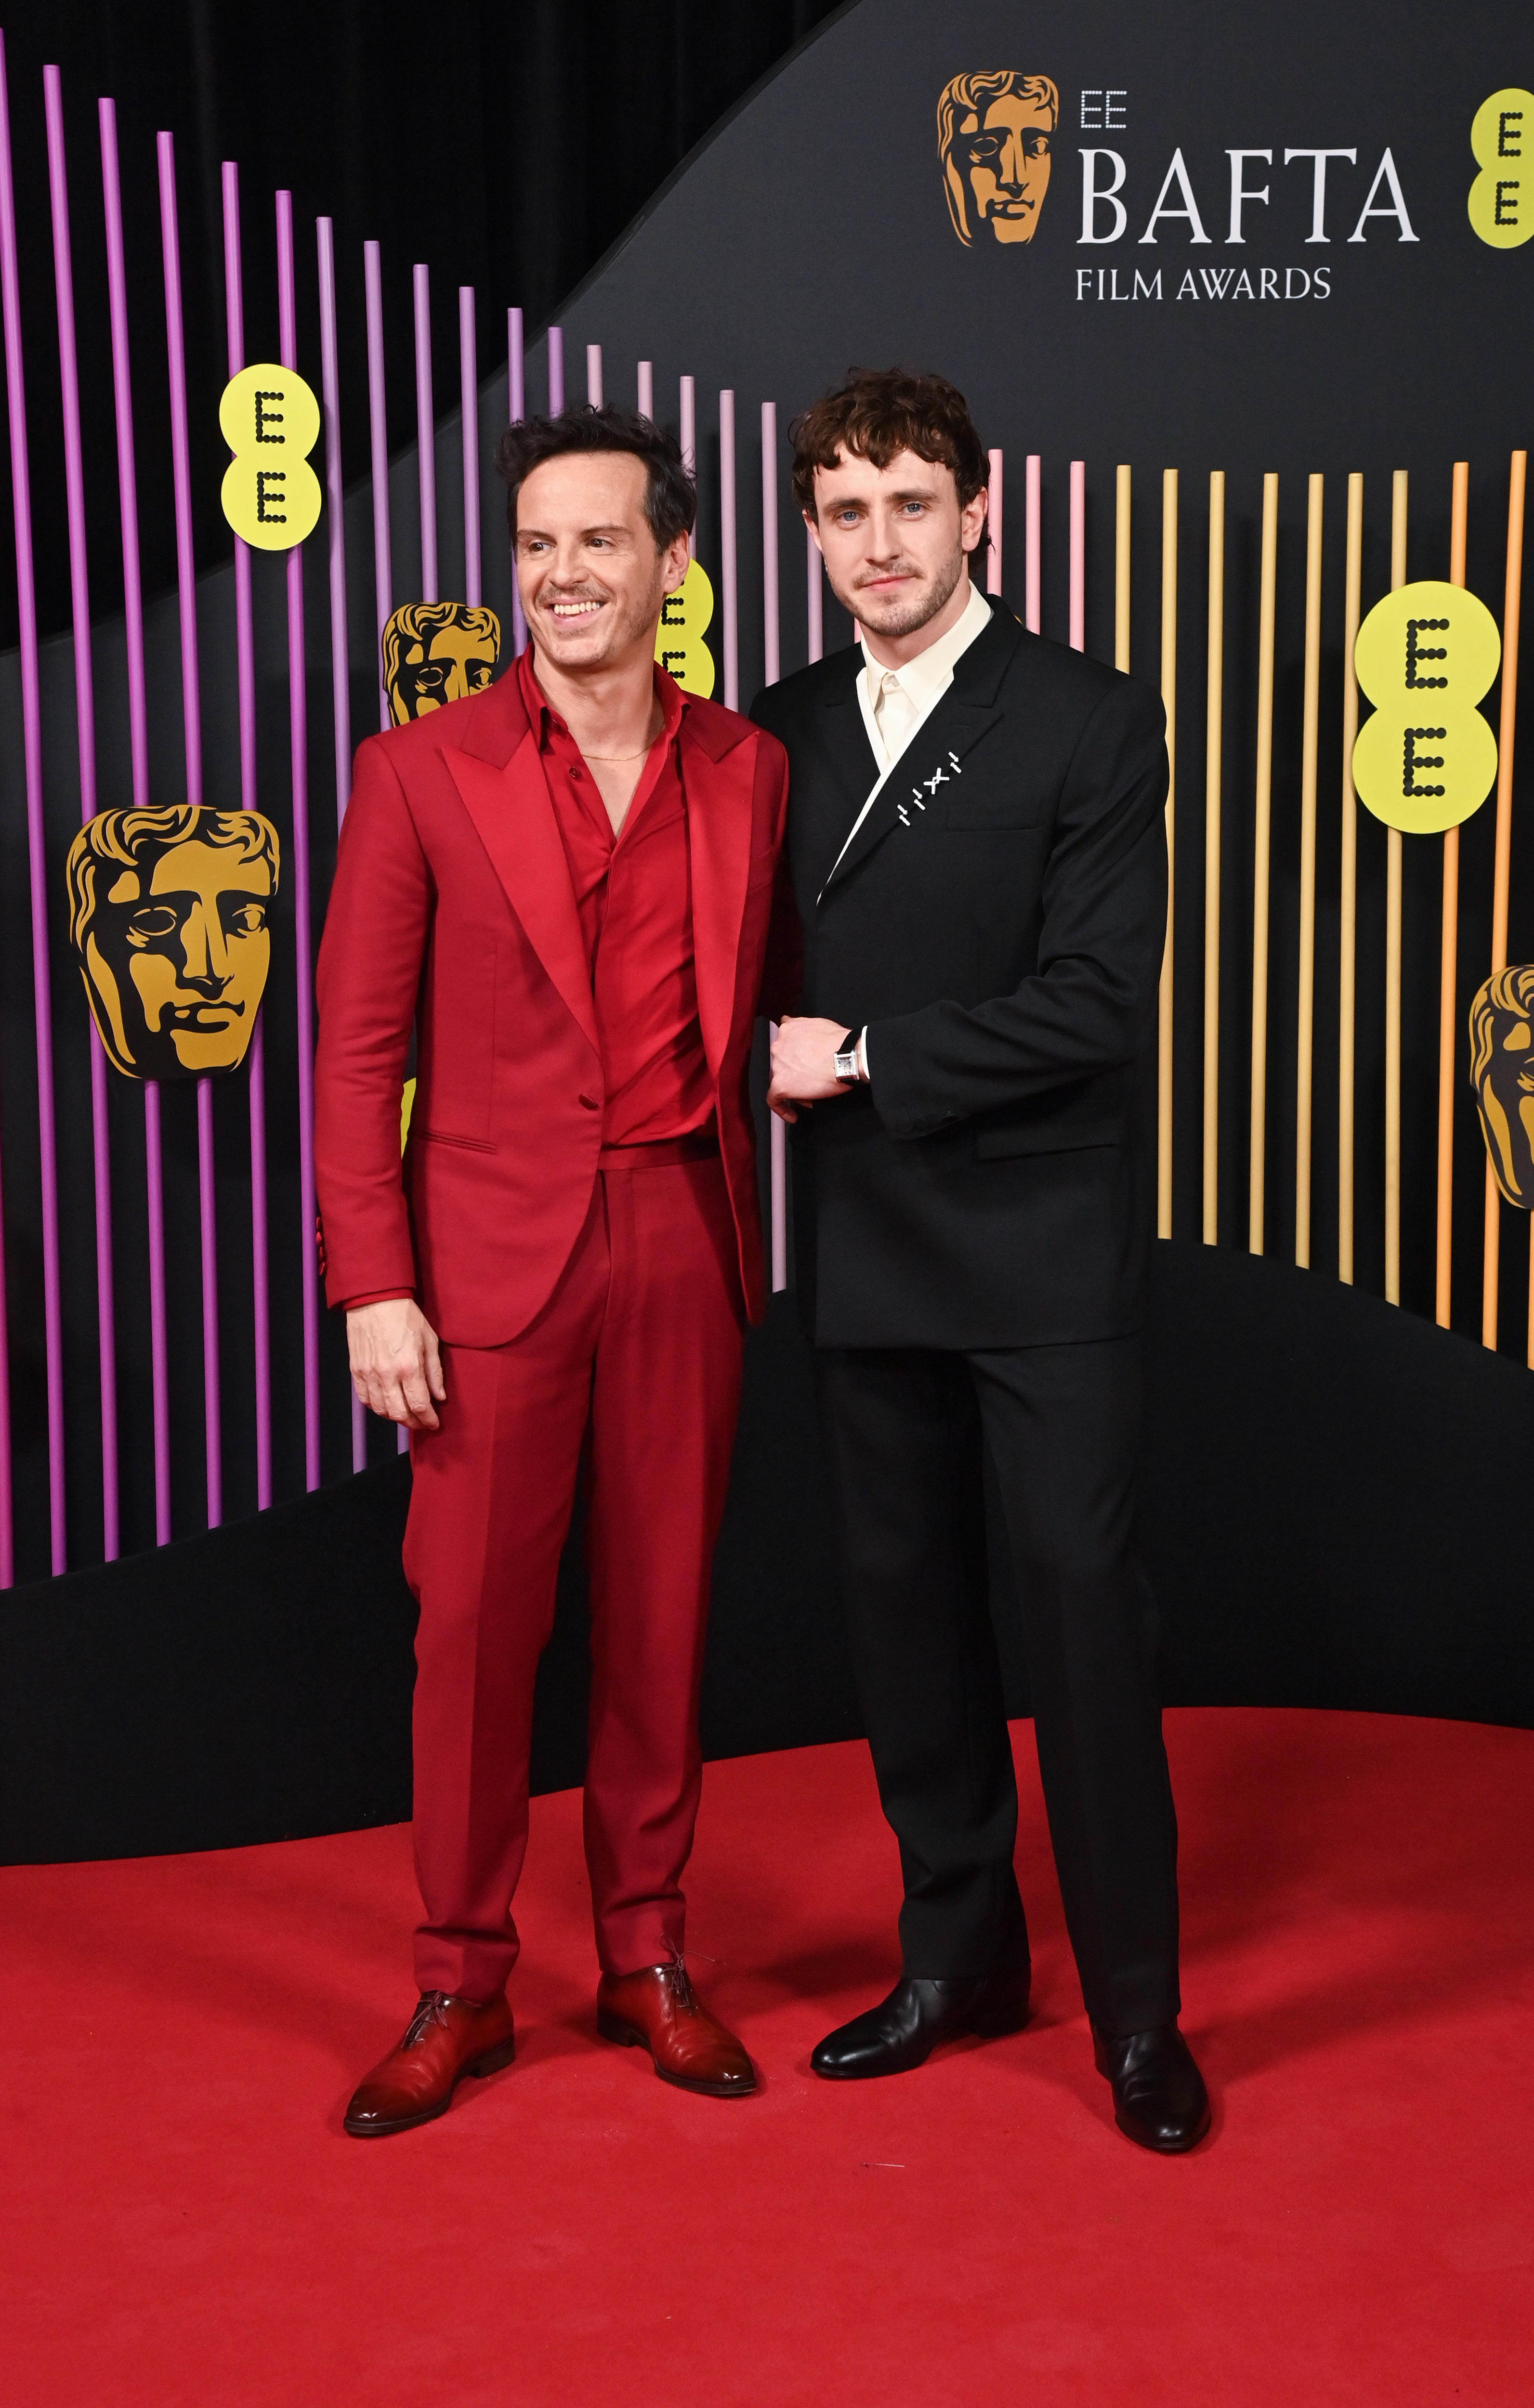 Andrew Scott and Paul Mescal on the red carpet in a red suit and a black suit